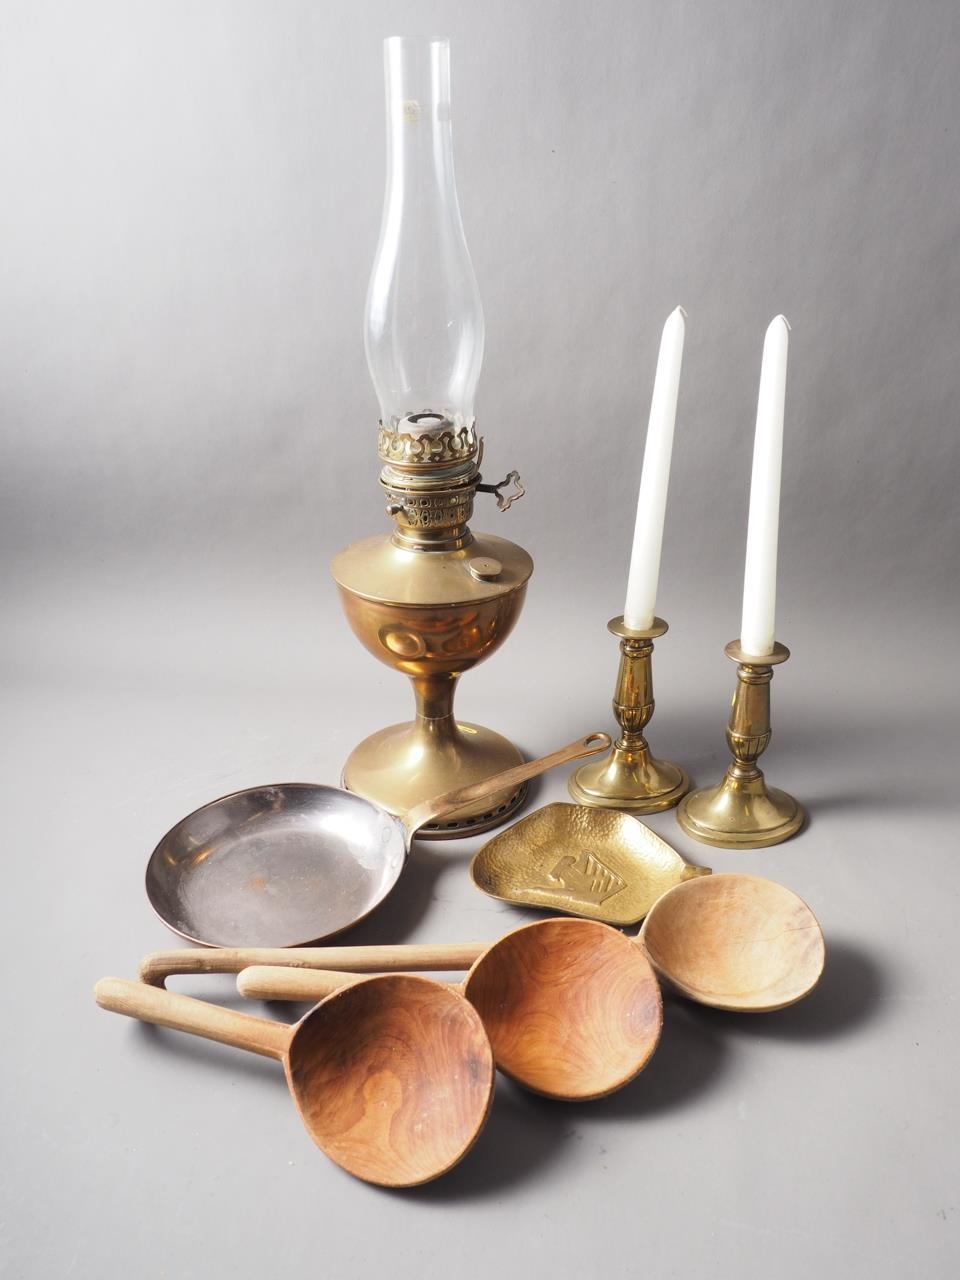 A brass oil lamp, a pair of brass candlesticks, a copper saucepan, a bronze ashtray and three carved